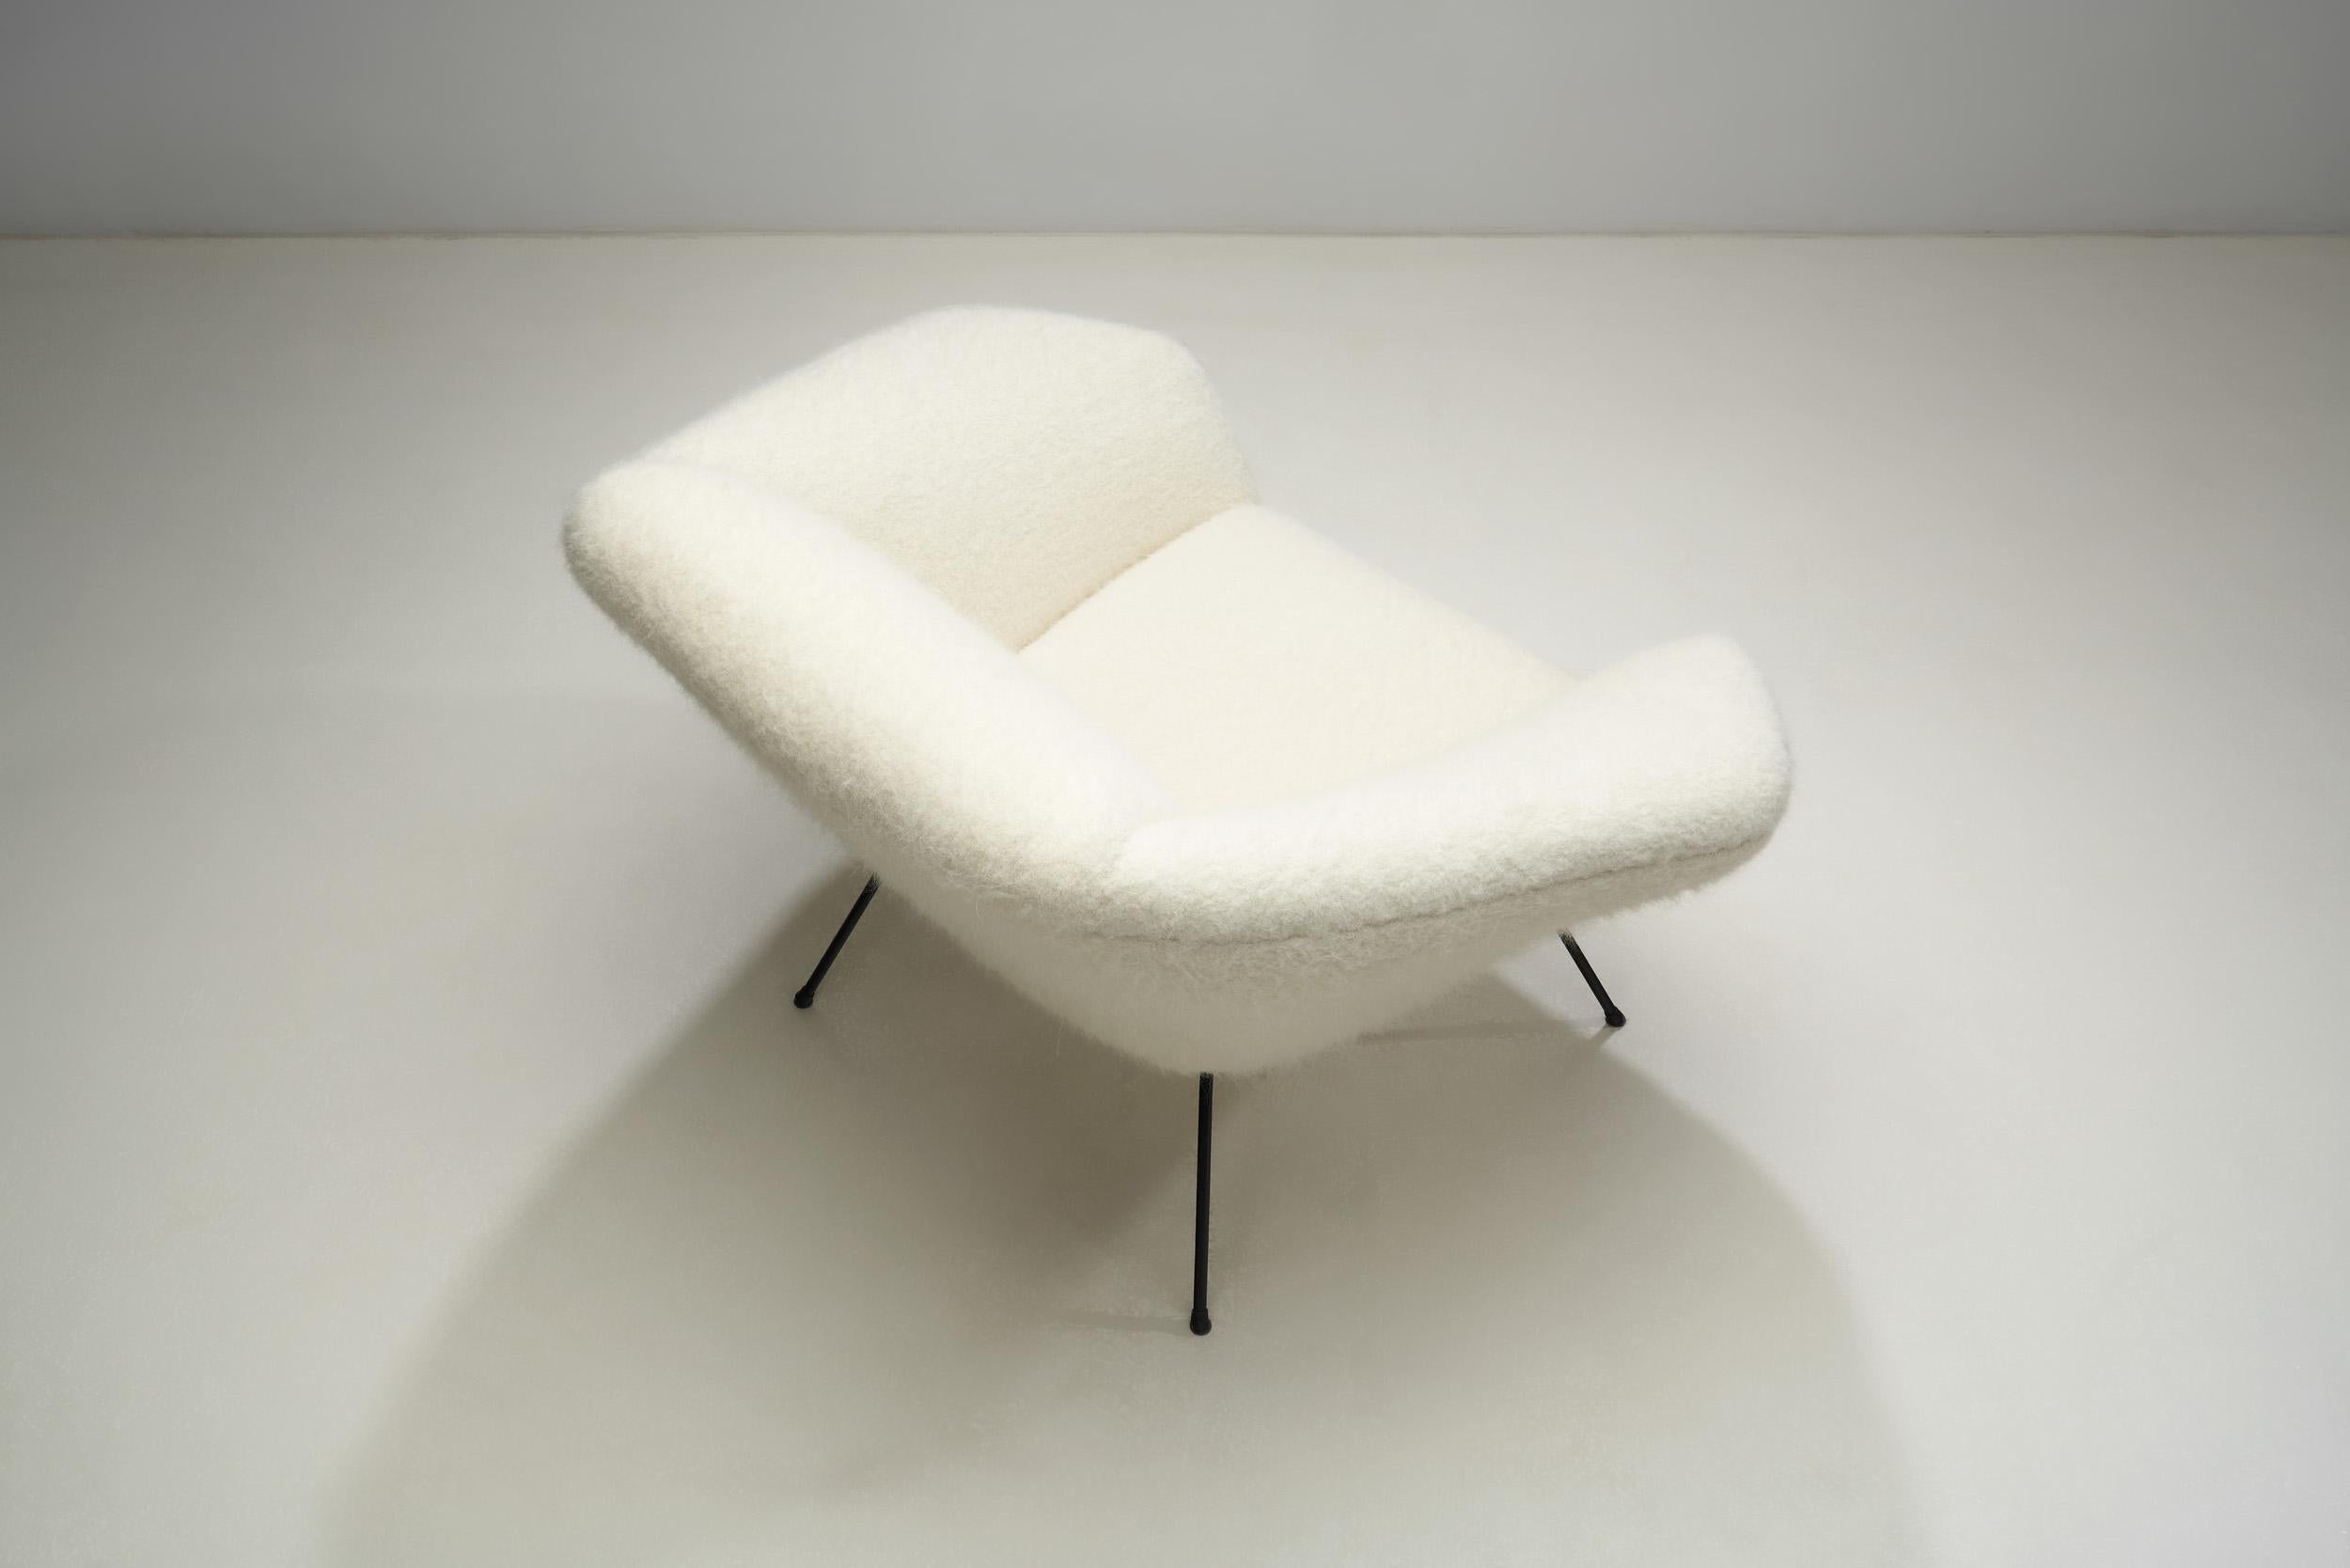 Mid-20th Century Italian Mid-Century Modern Upholstered Lounge Chair with Metal Legs, Italy 1960s For Sale